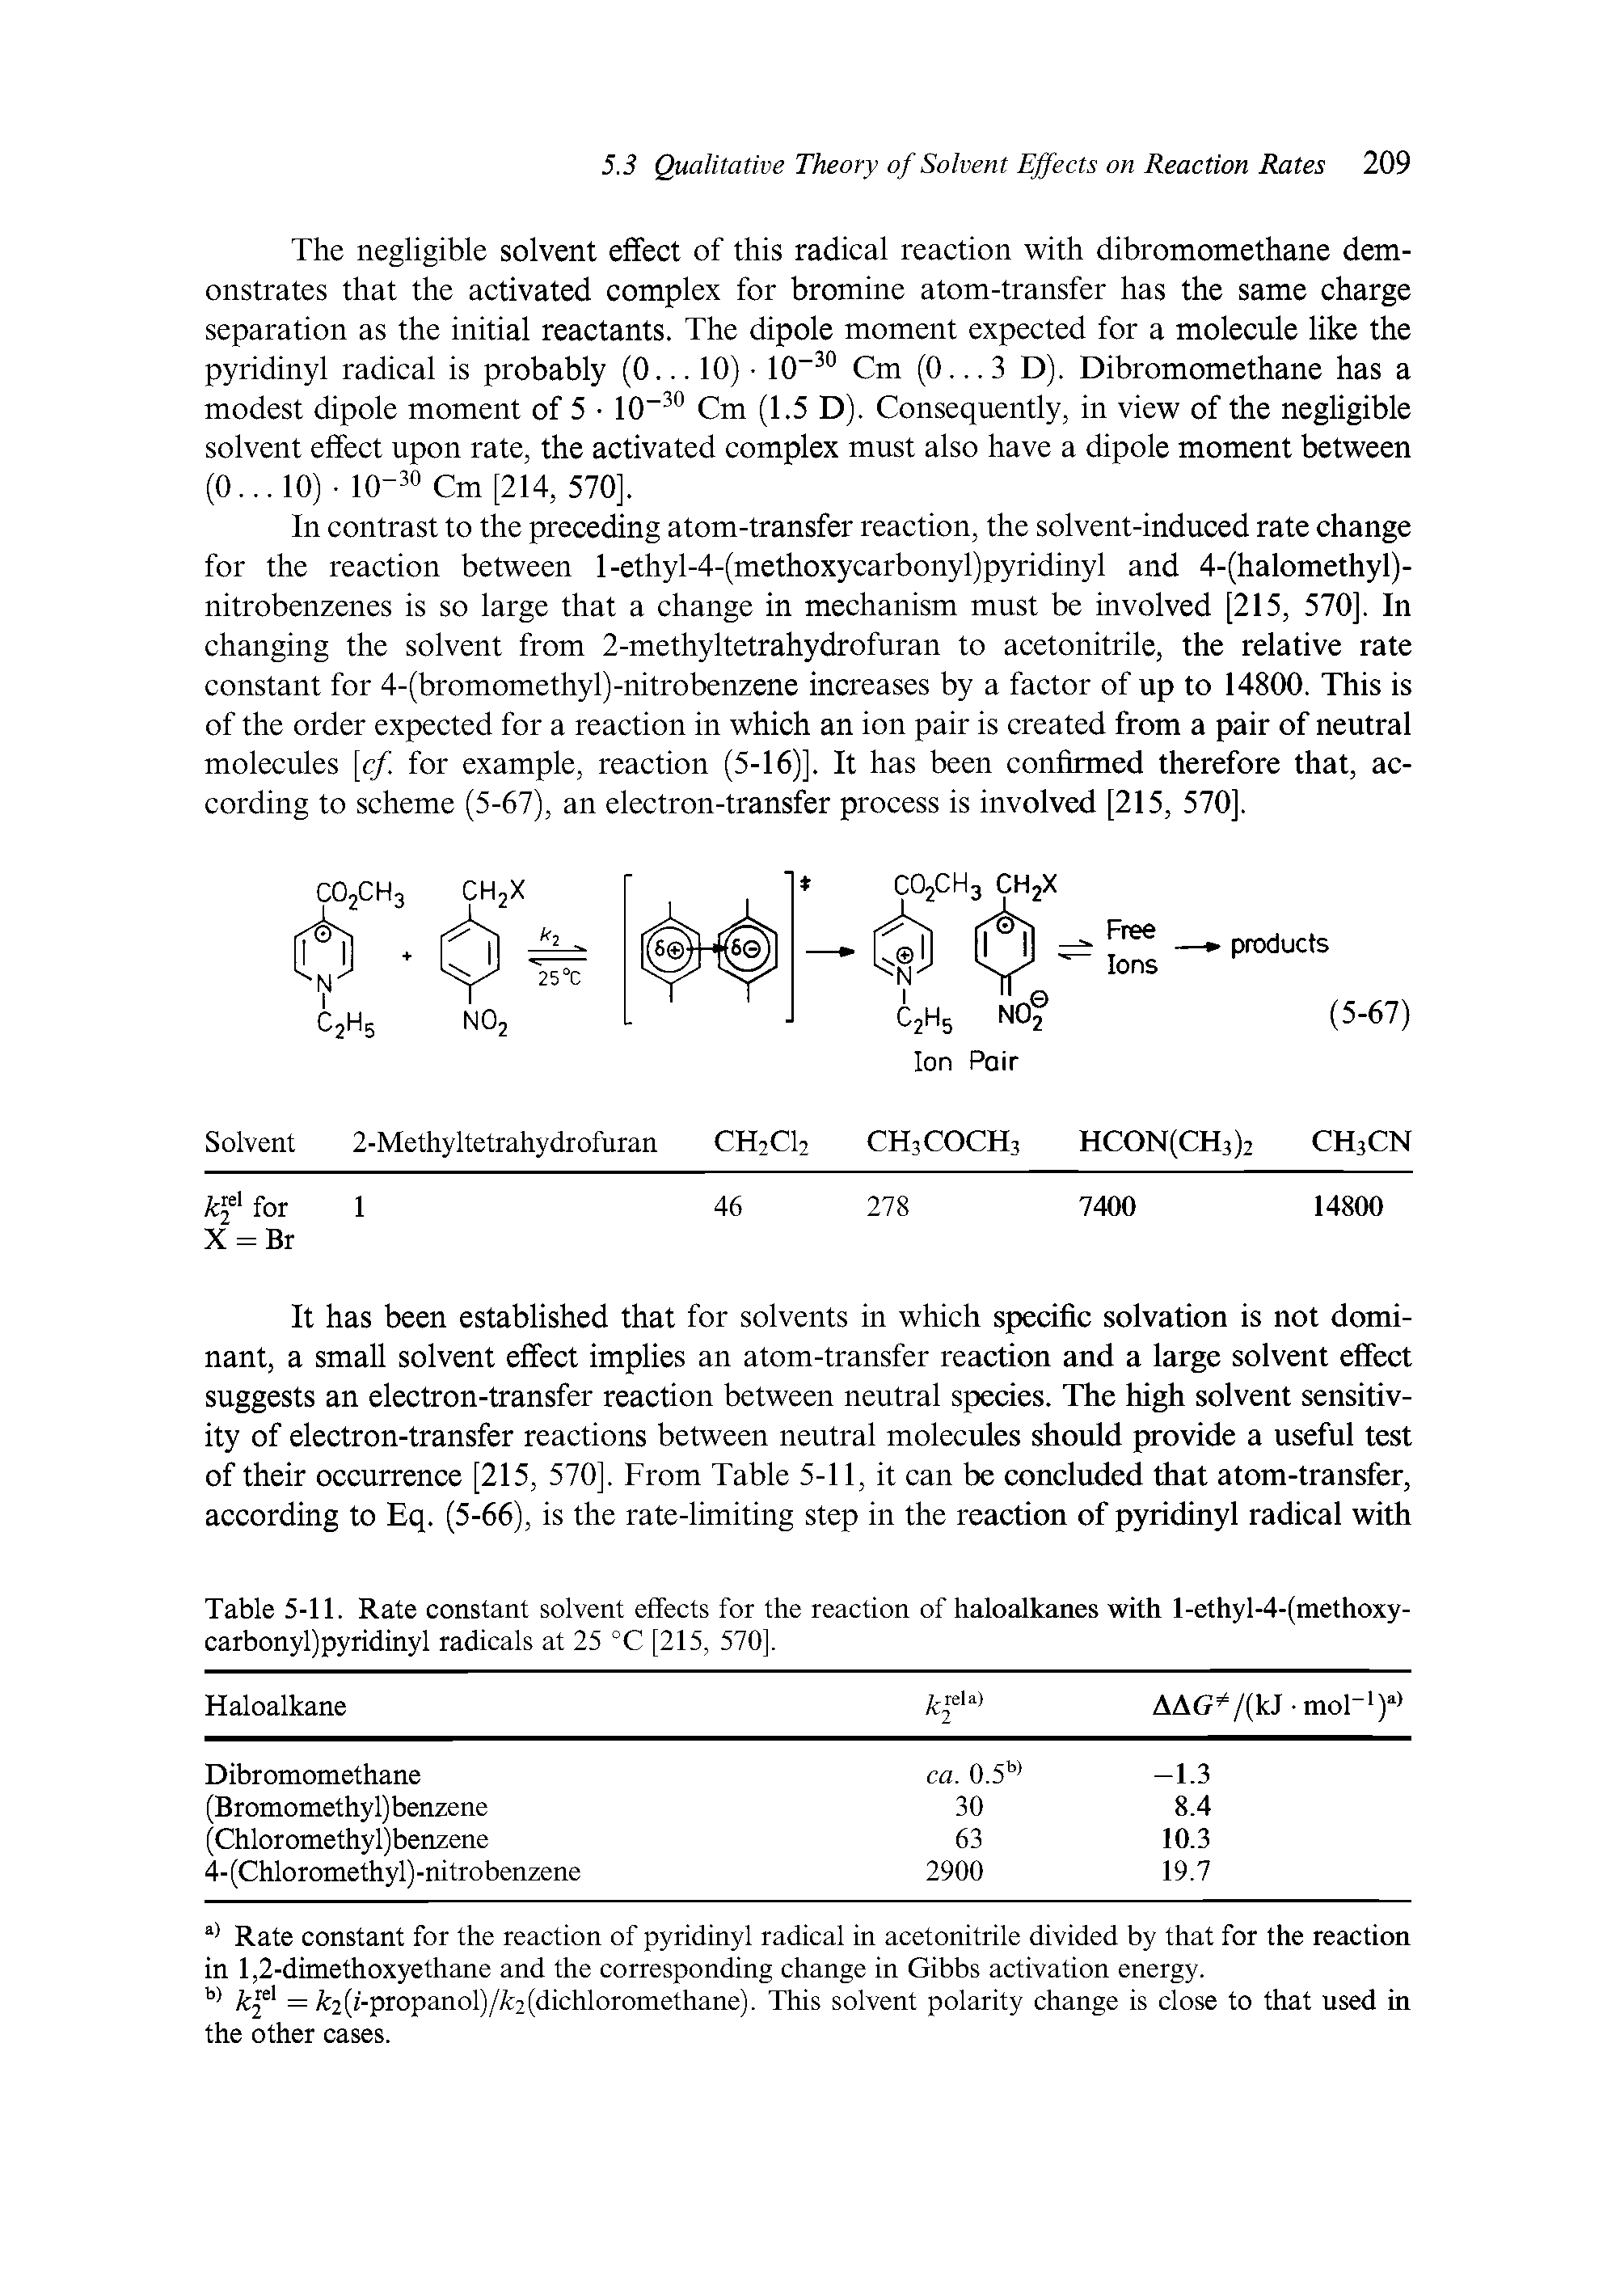 Table 5-11. Rate constant solvent effects for the reaction of haloalkanes with l-ethyl-4-(methoxy-carbonyl)pyridinyl radicals at 25 °C [215, 570],...